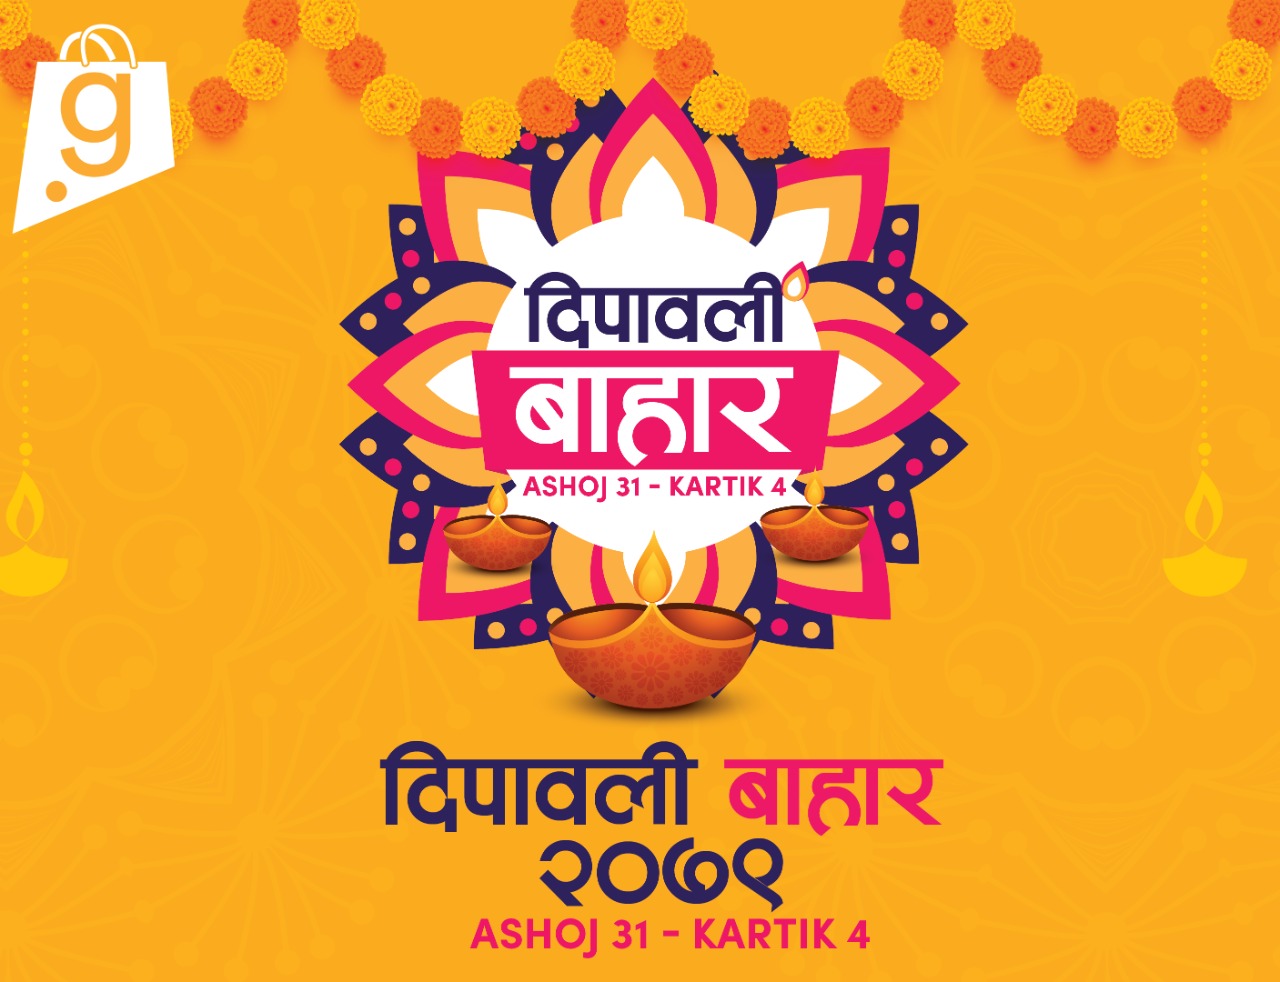 Gyapu’s ‘Diwali Bahar’ offer: Up to 20% discount on purchase of materials